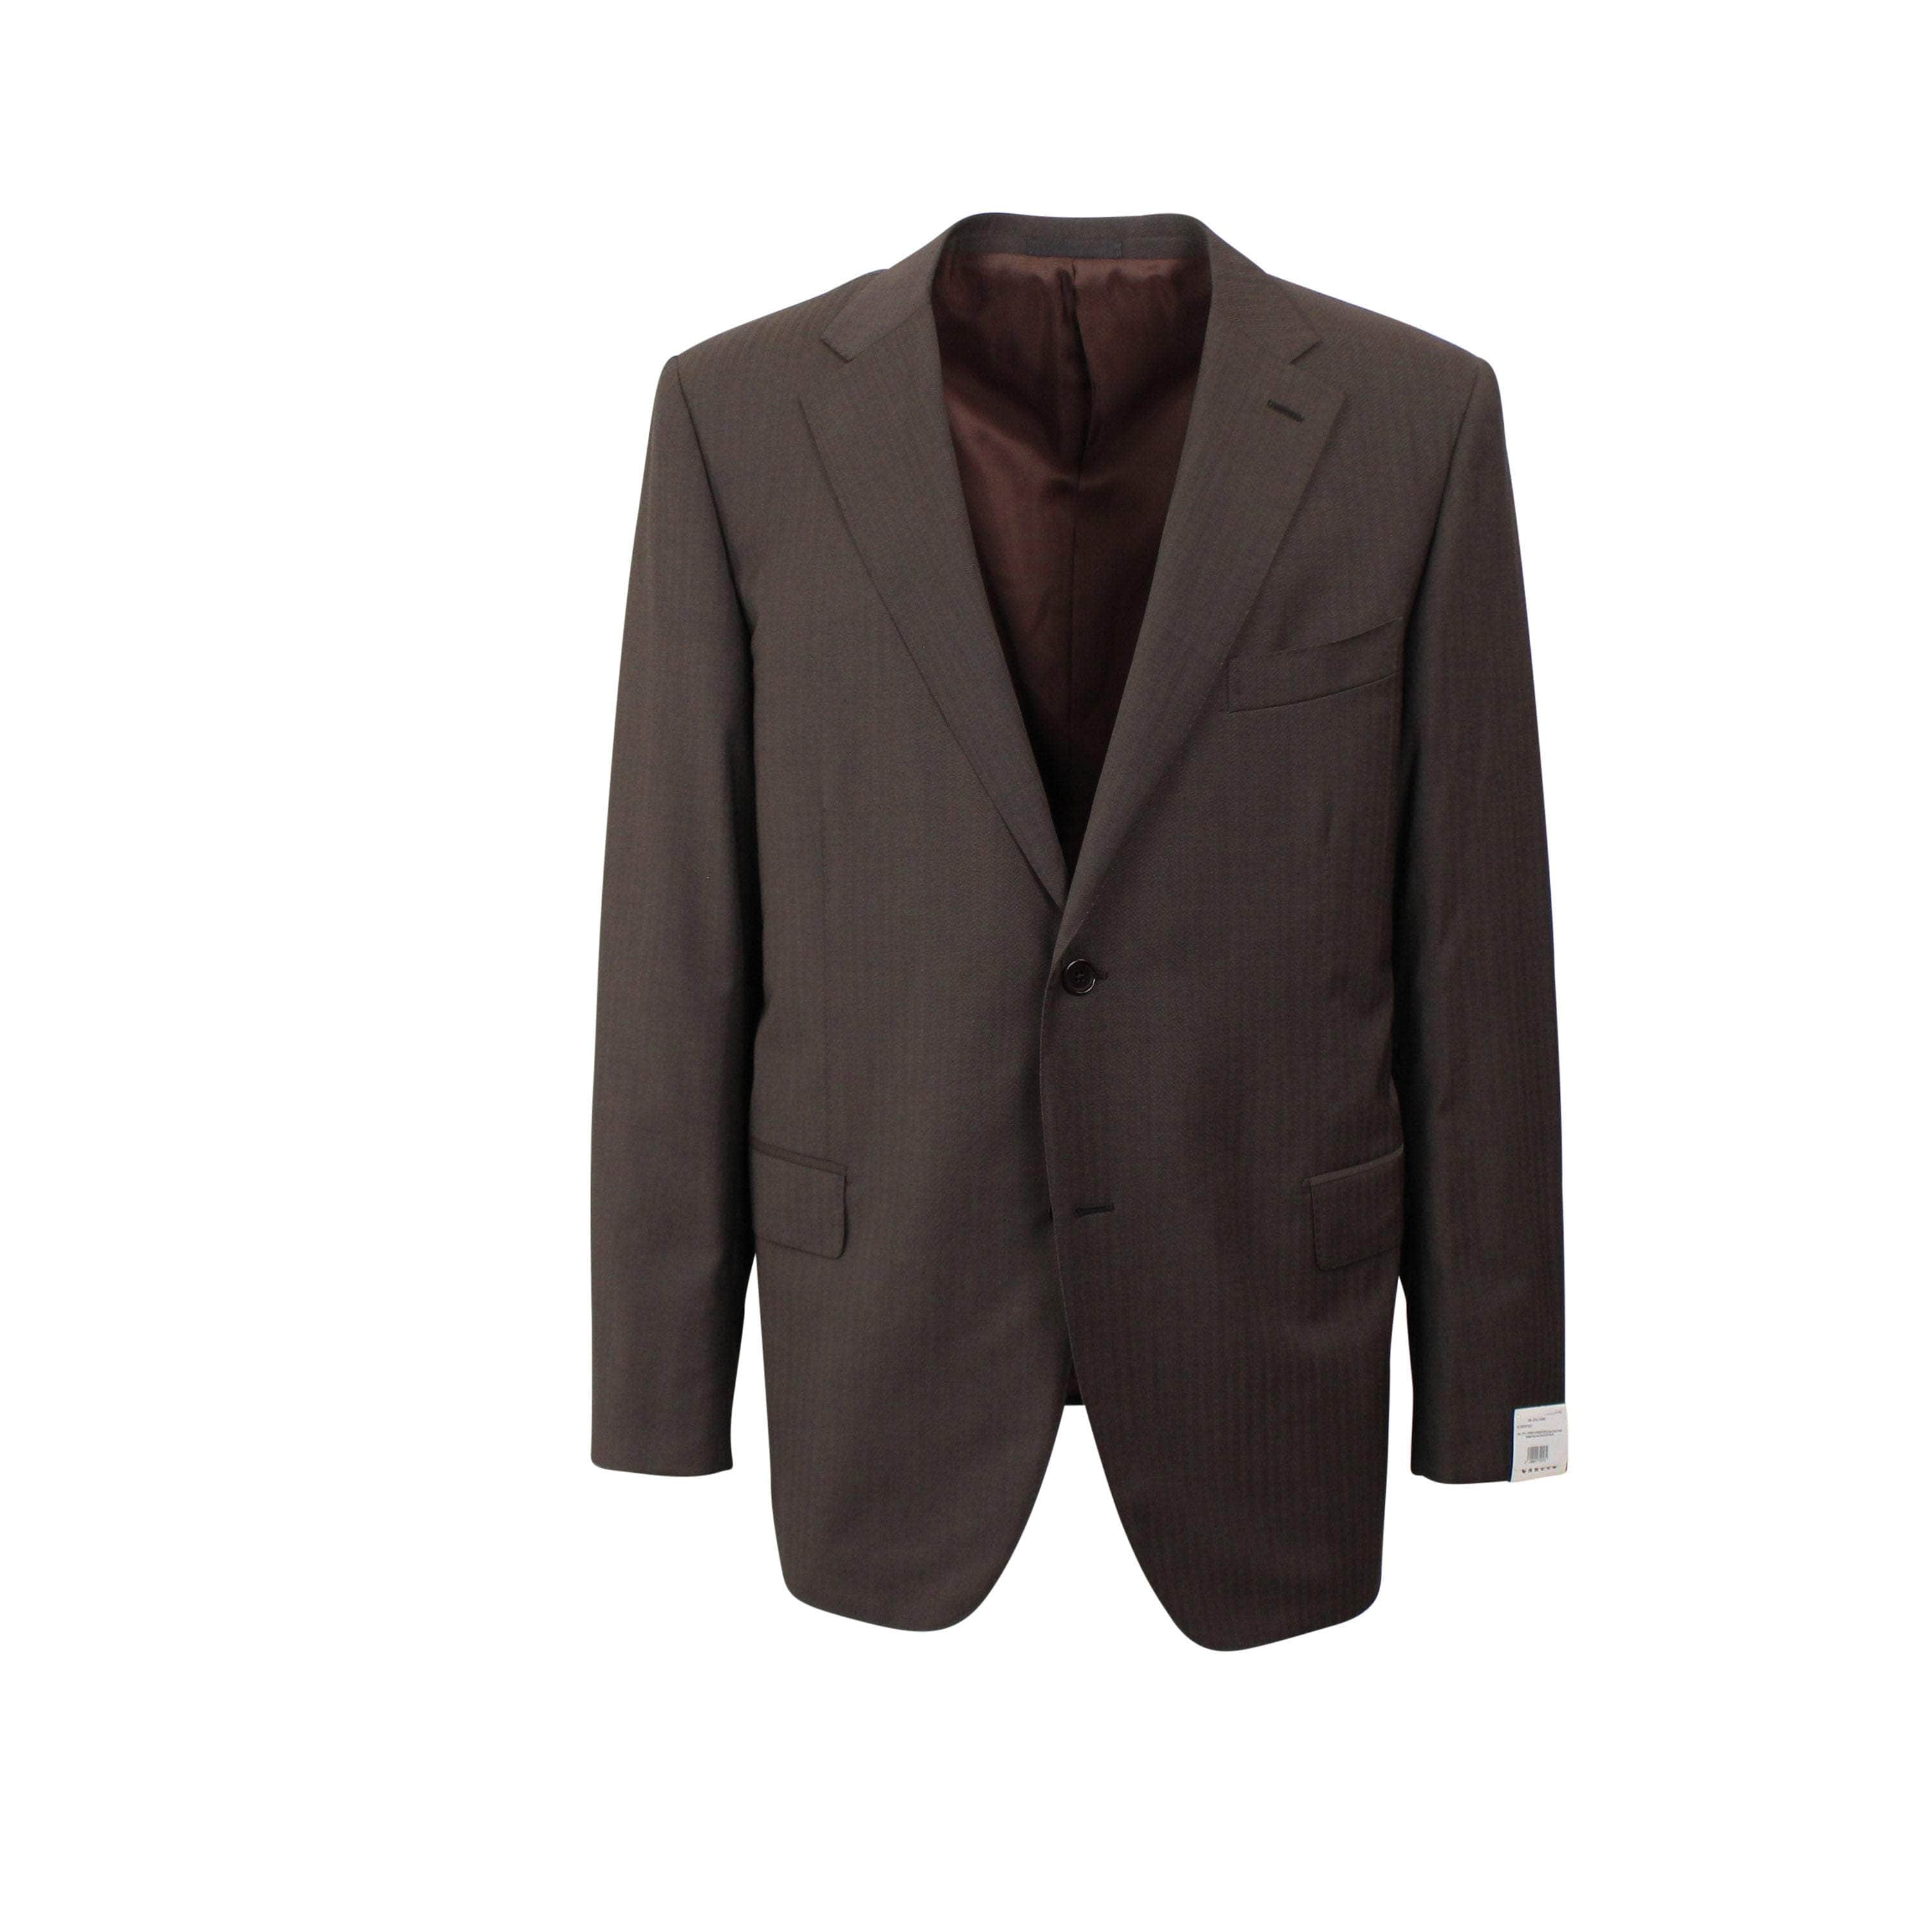 Caruso 750-1000, caruso, channelenable-all, chicmi, couponcollection, main-clothing, shop375, size-56, Stadium Goods 56 Brown Caruso Single Breasted Wool And Silk Suit 6R CRS-XTPS-0198/56 CRS-XTPS-0198/56